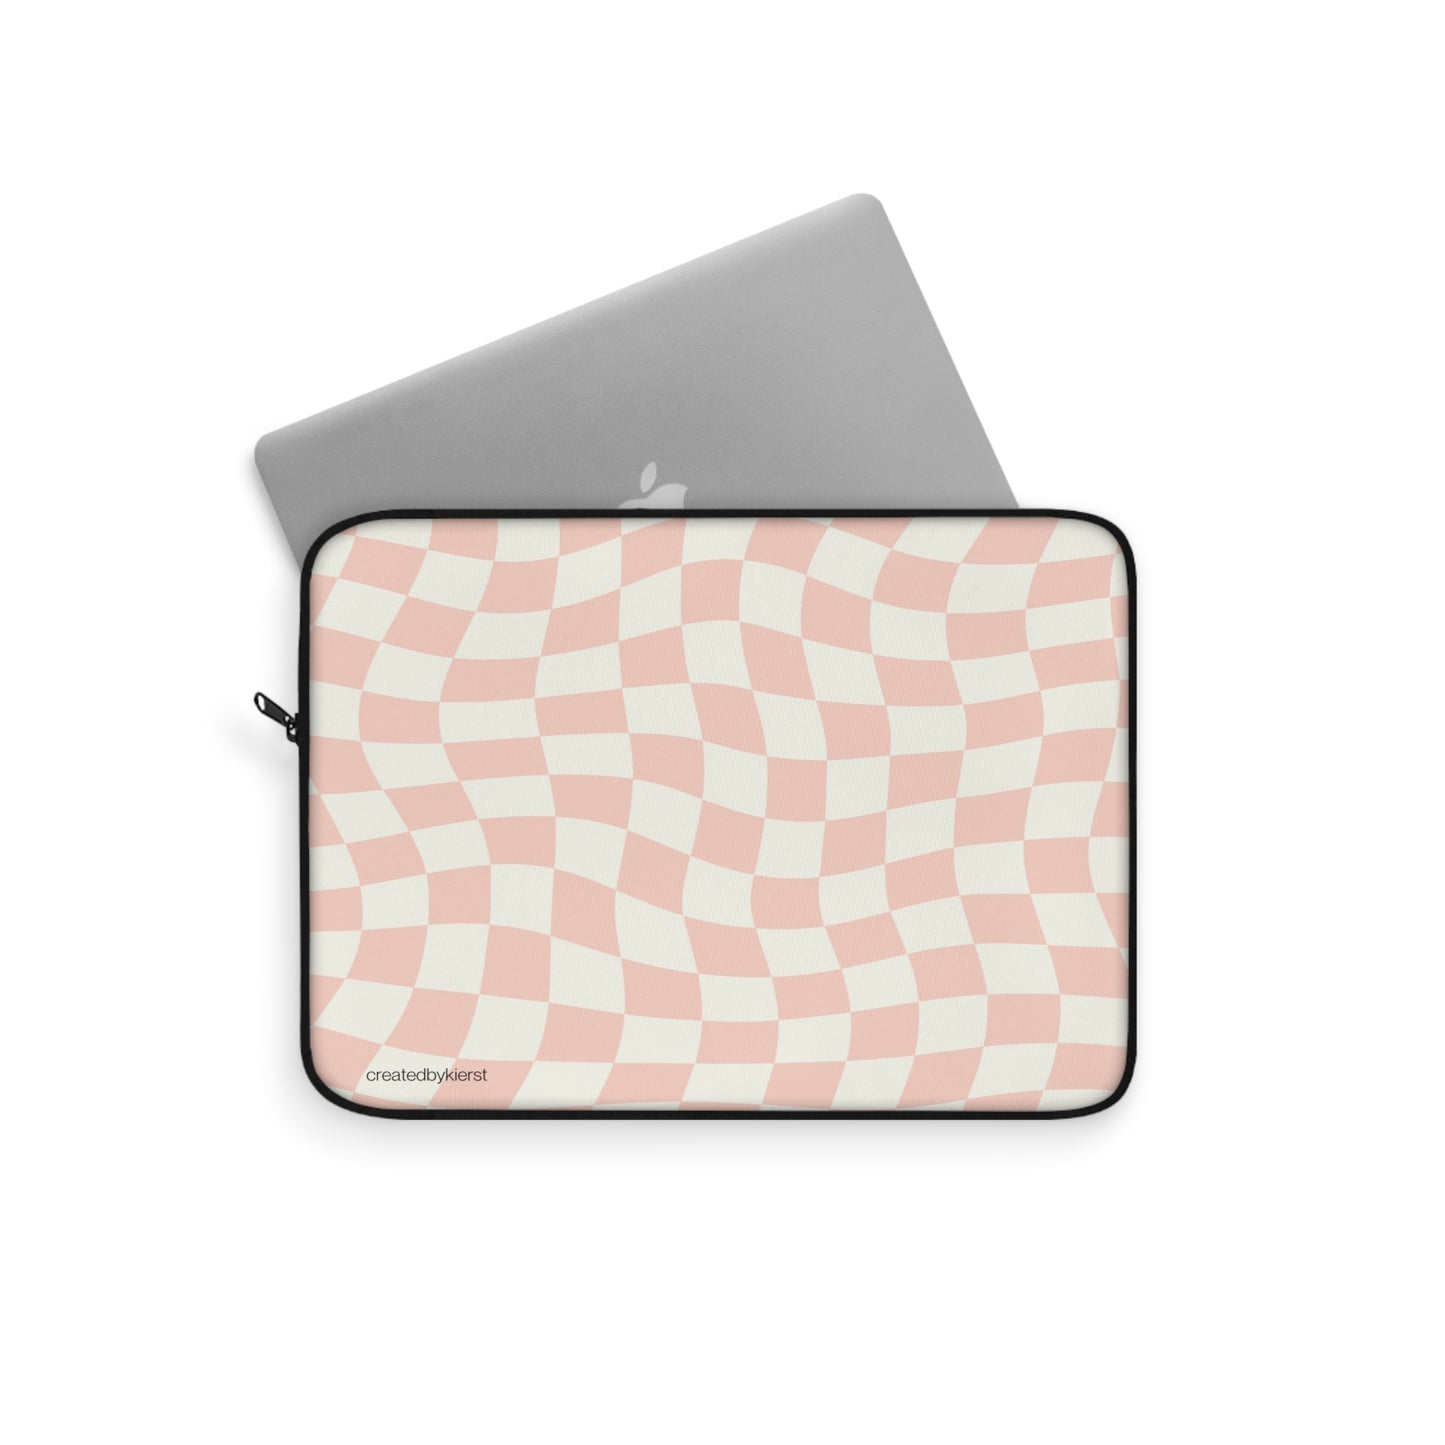 Peaches and Cream Checkered Laptop Sleeve